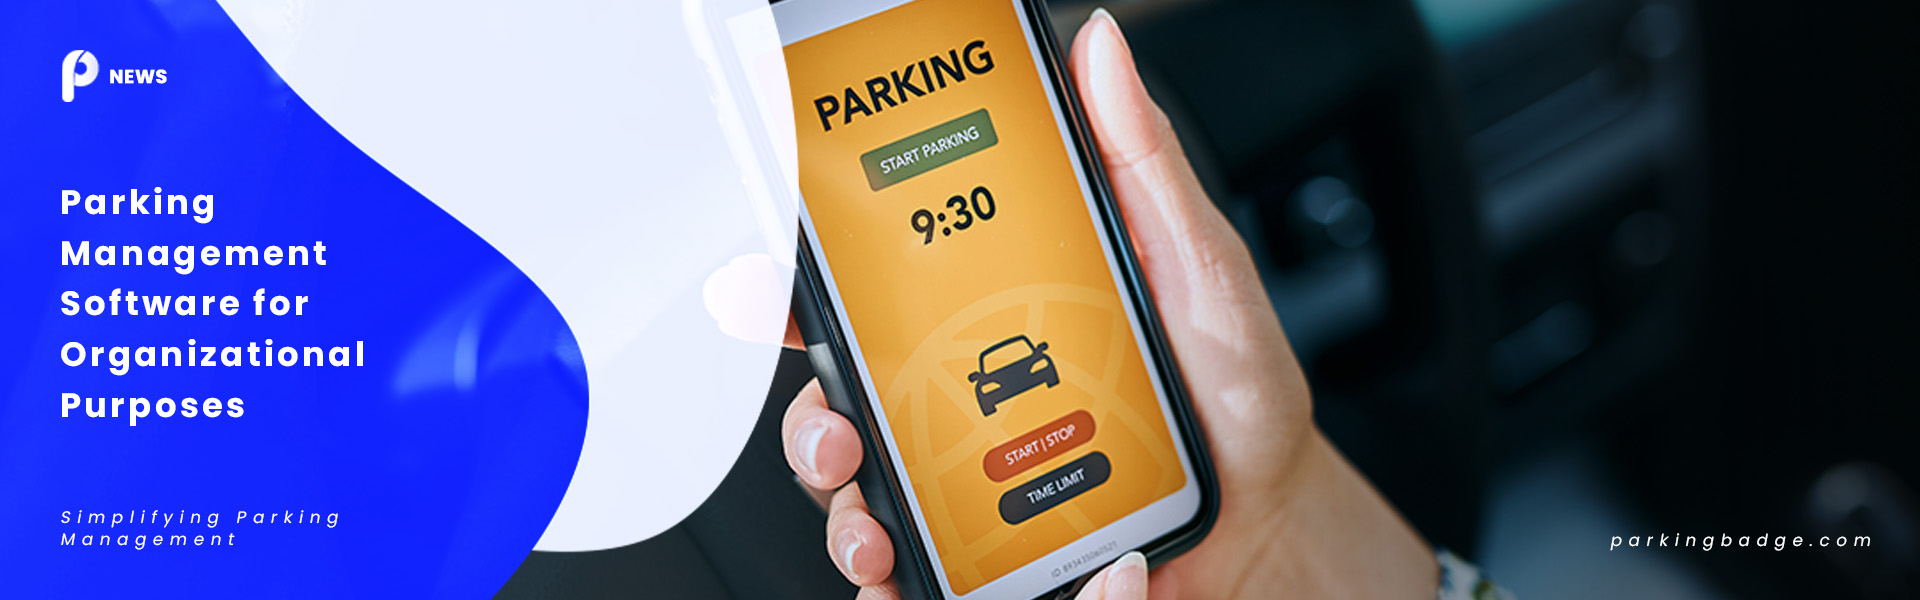 Parking Management Software for Organizational Purposes